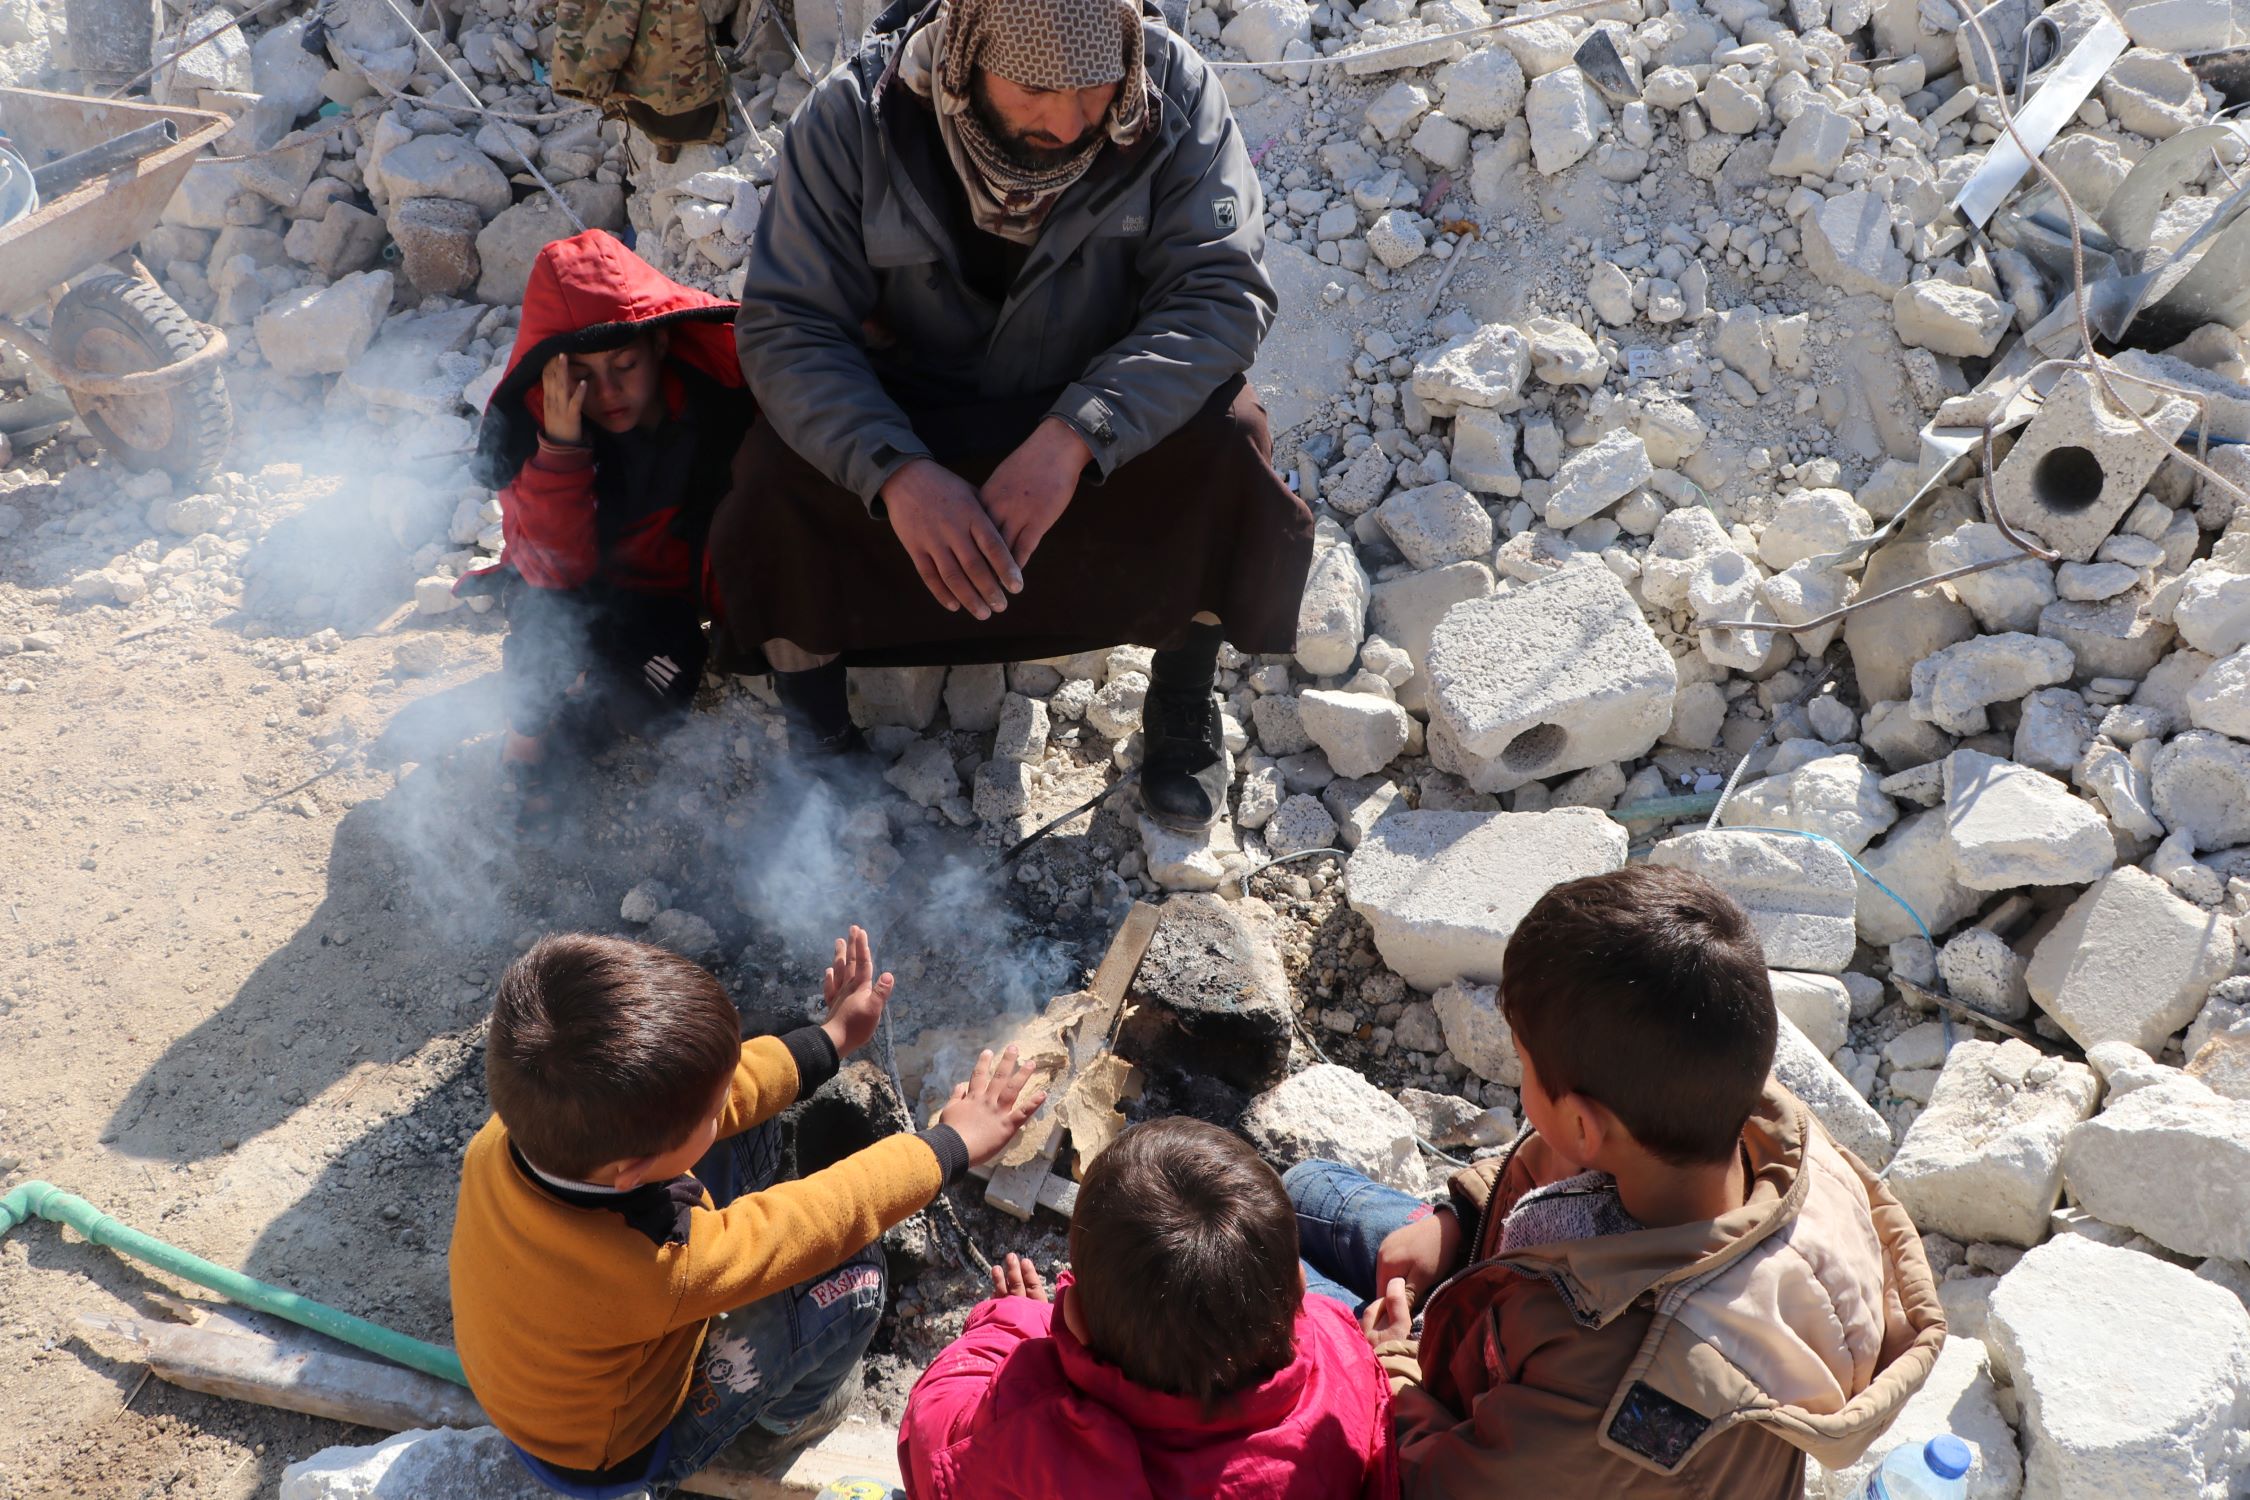 Man and children keeping warm around an outside fire amid earthquake rubble in Syria